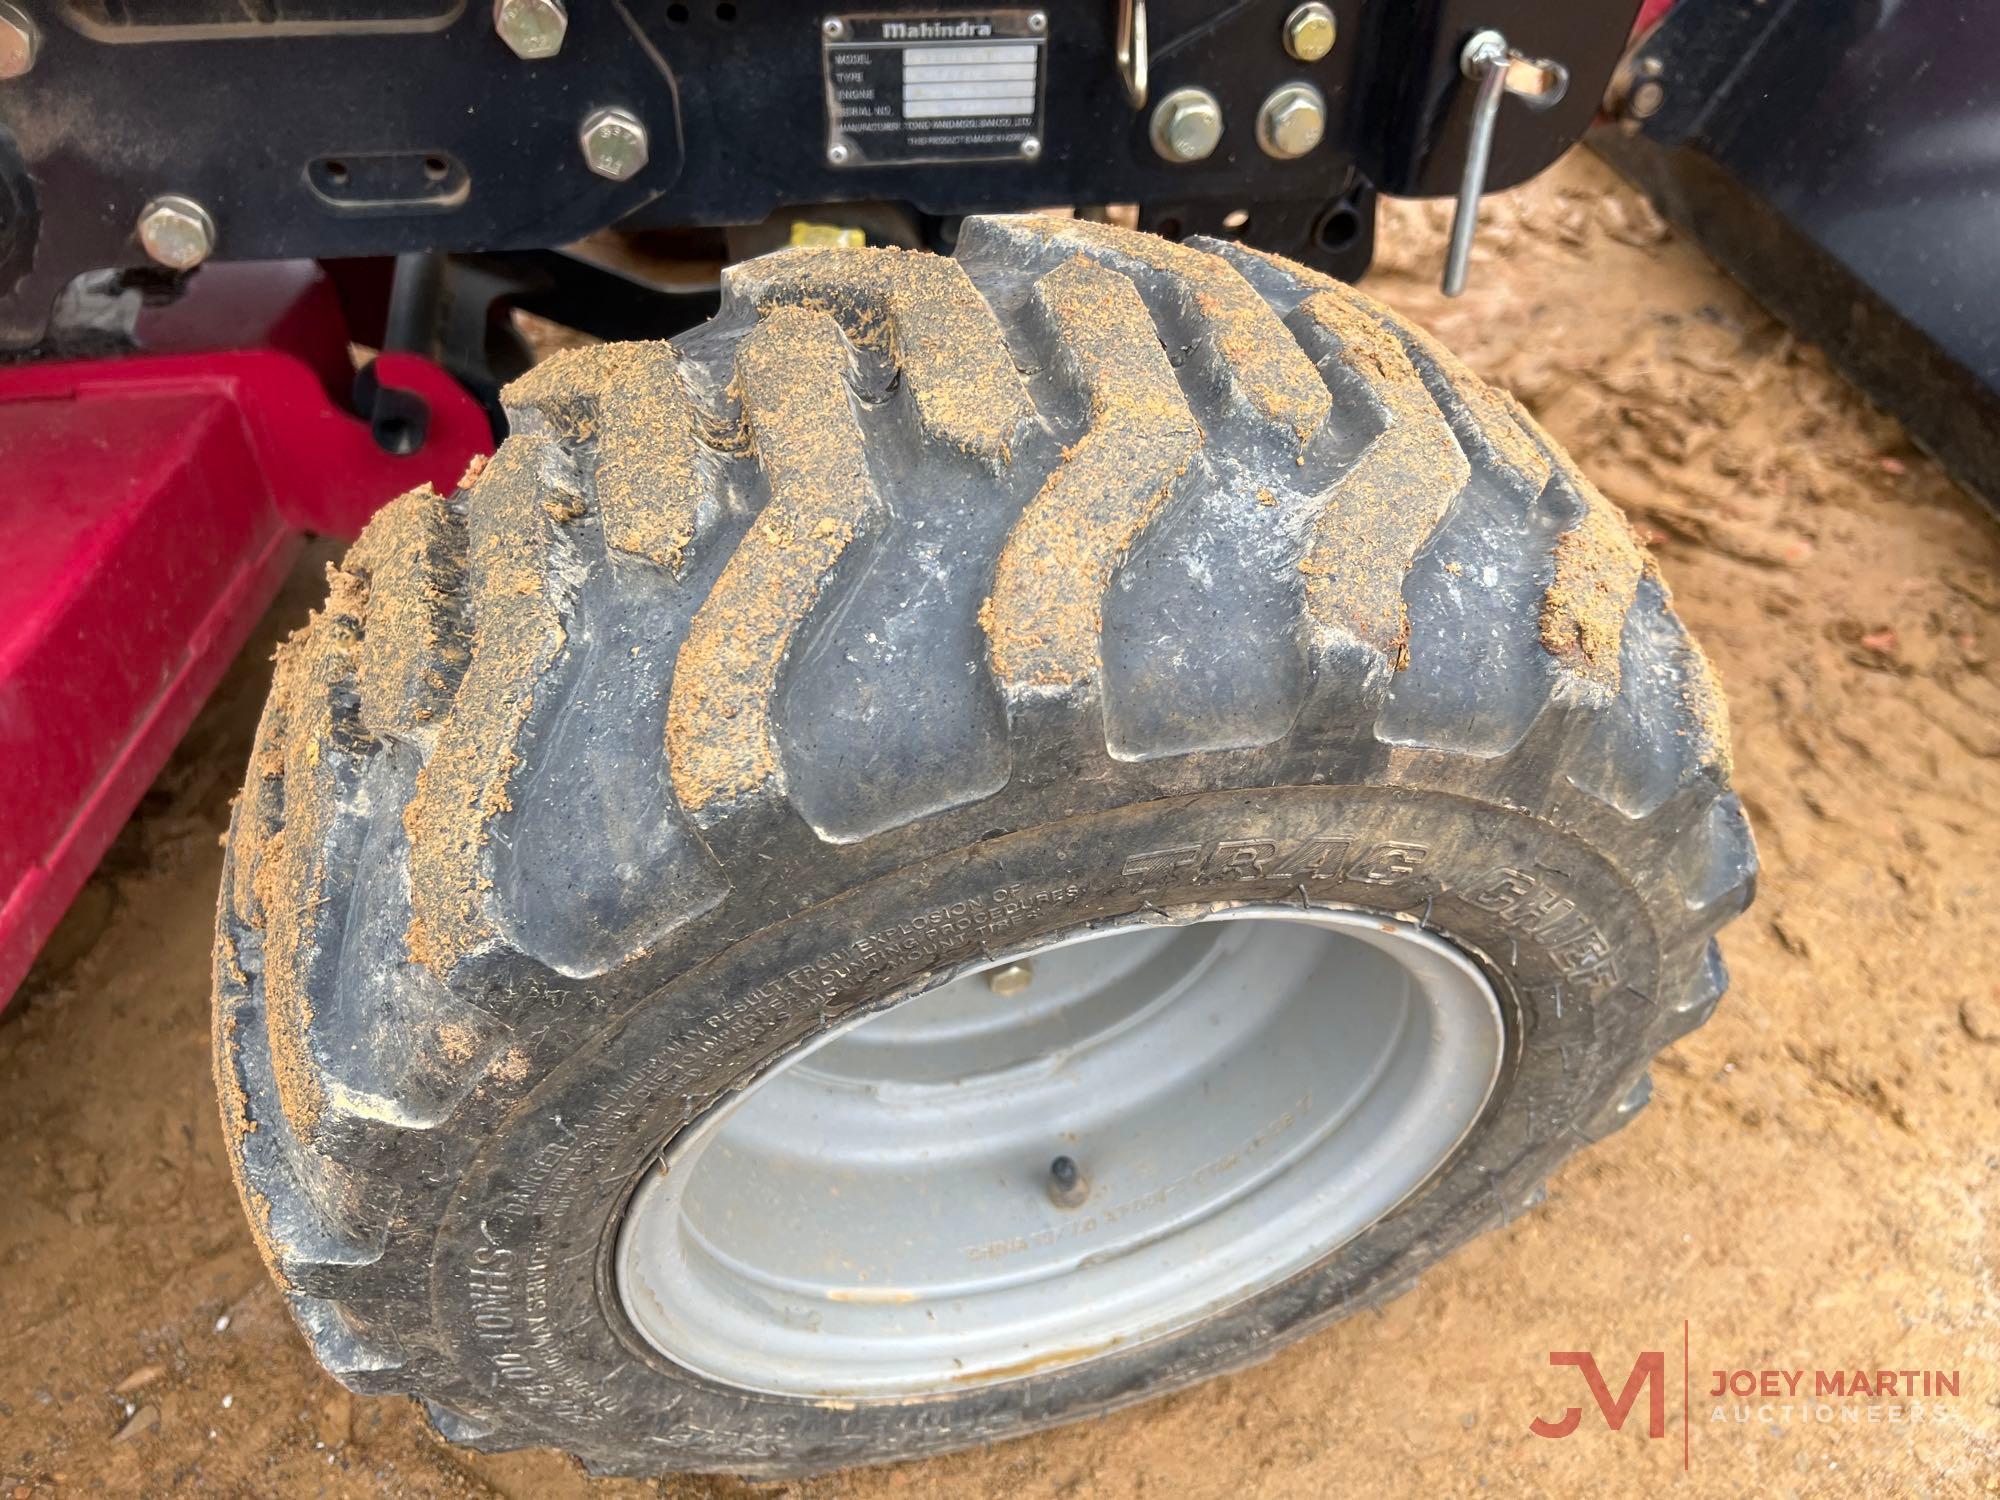 2019 MAHINDRA EMAX 25S HST TRACTOR